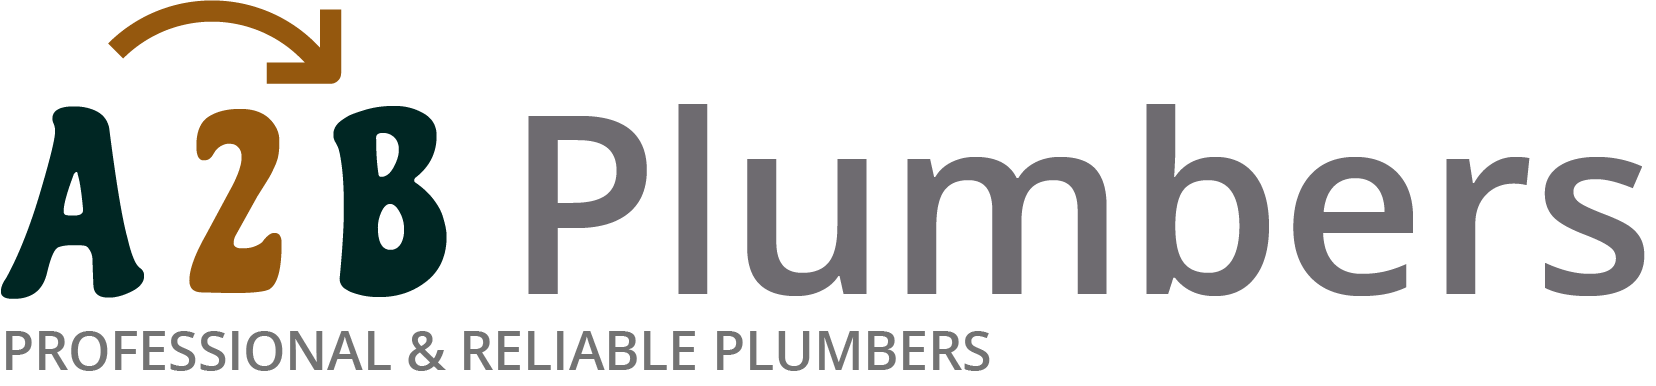 If you need a boiler installed, a radiator repaired or a leaking tap fixed, call us now - we provide services for properties in Portslade and the local area.